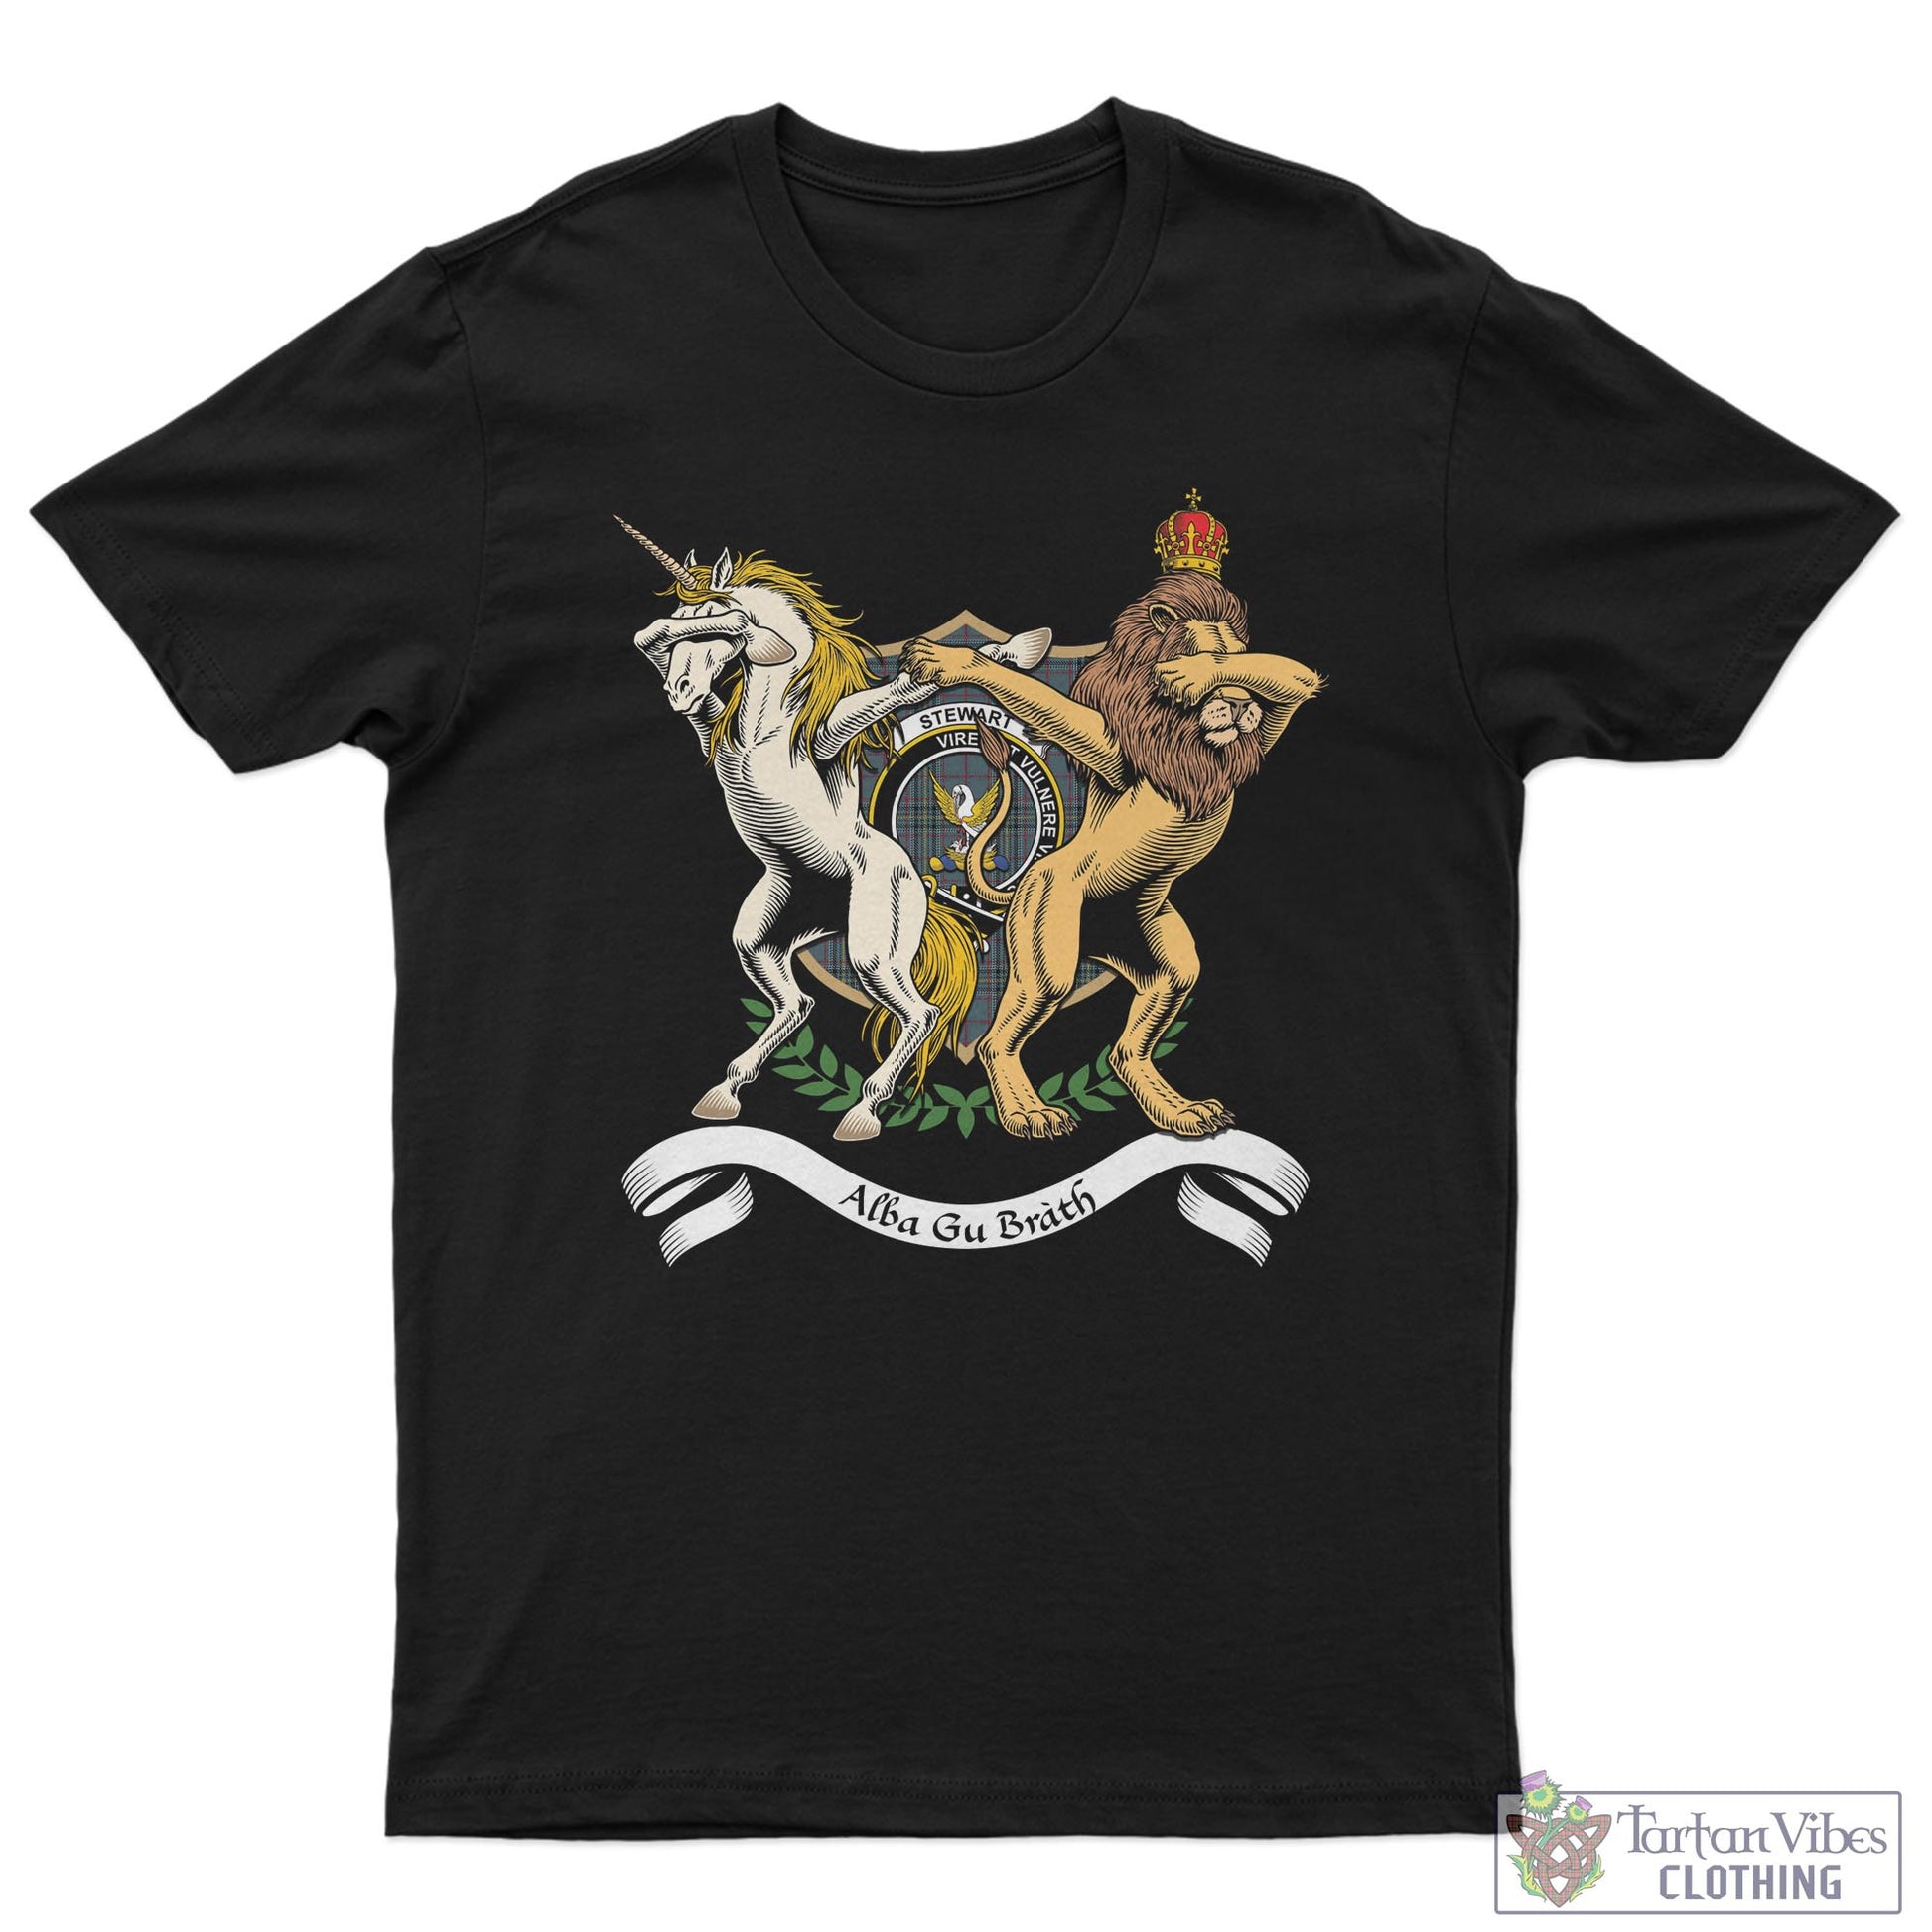 Tartan Vibes Clothing Stewart Grey Family Crest Cotton Men's T-Shirt with Scotland Royal Coat Of Arm Funny Style